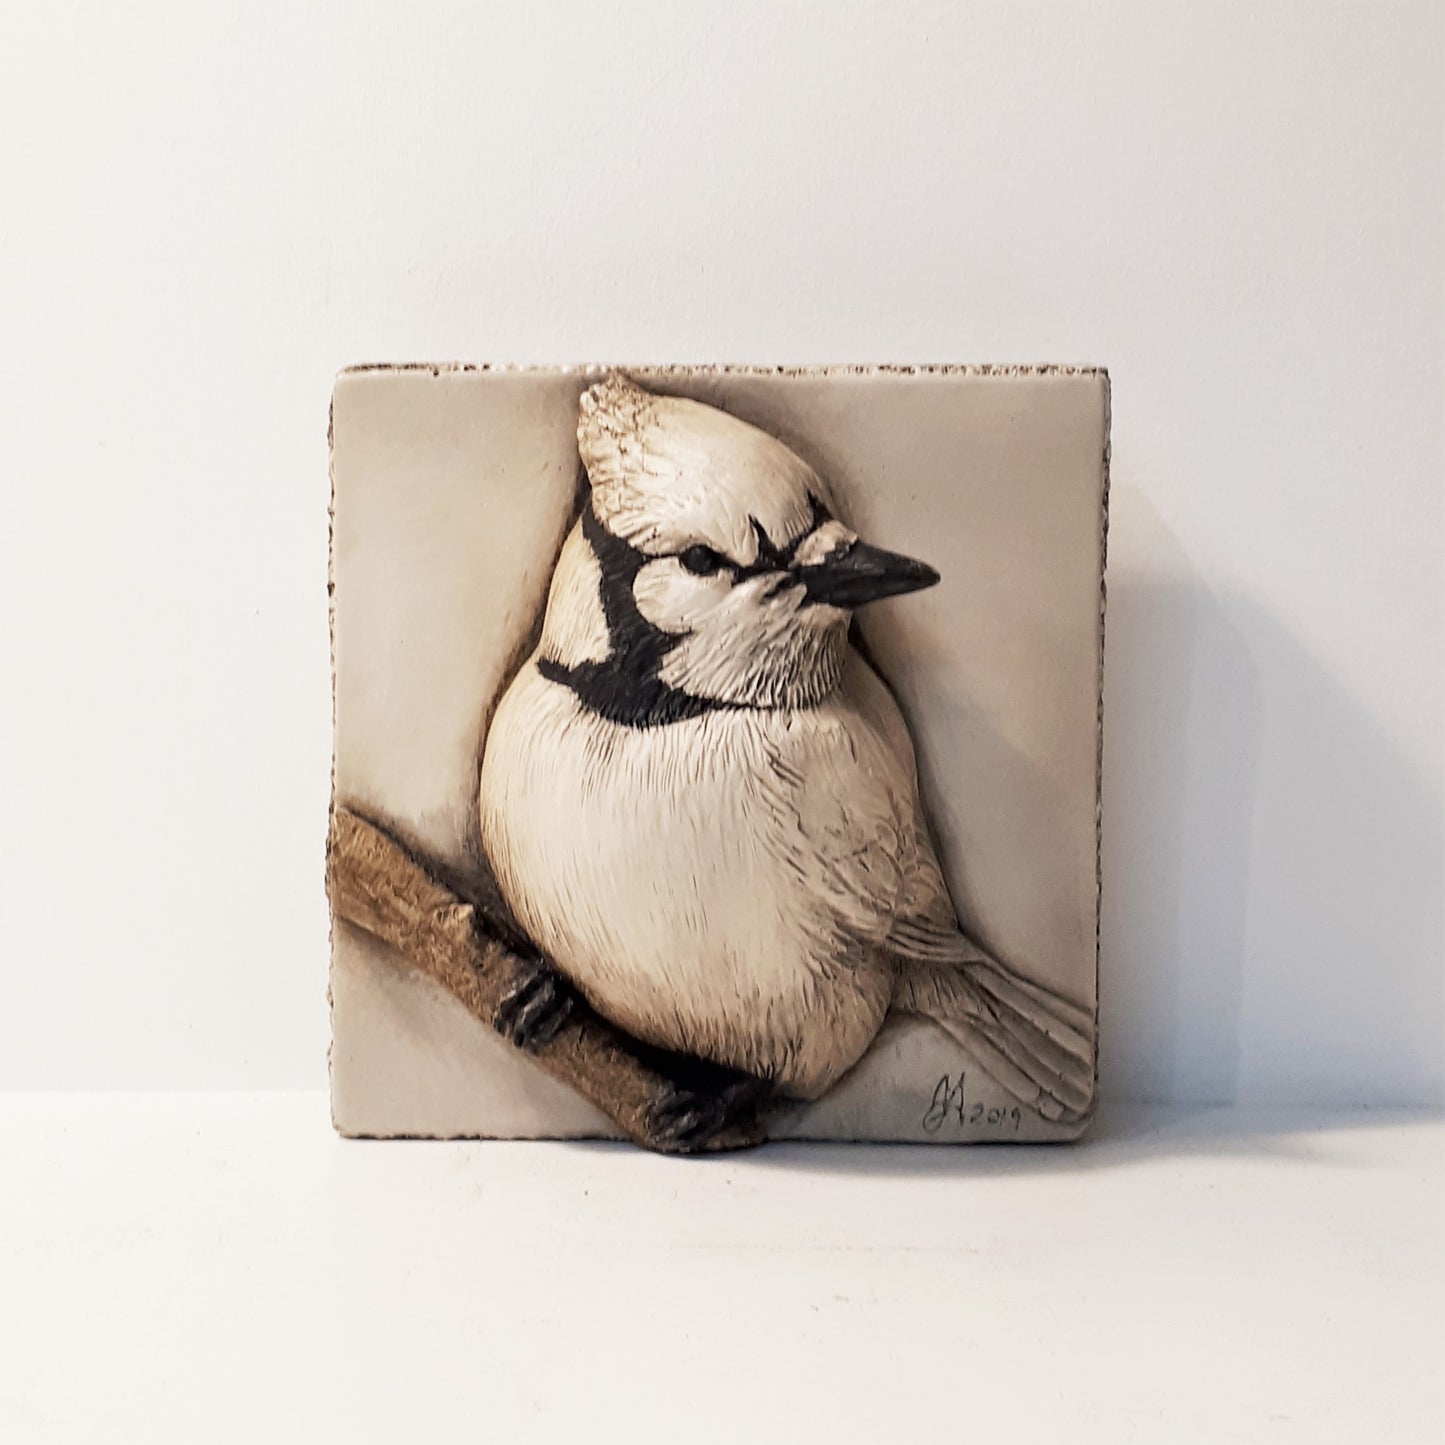 Limited Edition BLUE JAY (4x4) Black & White - Sculpted Cast Hydrostone